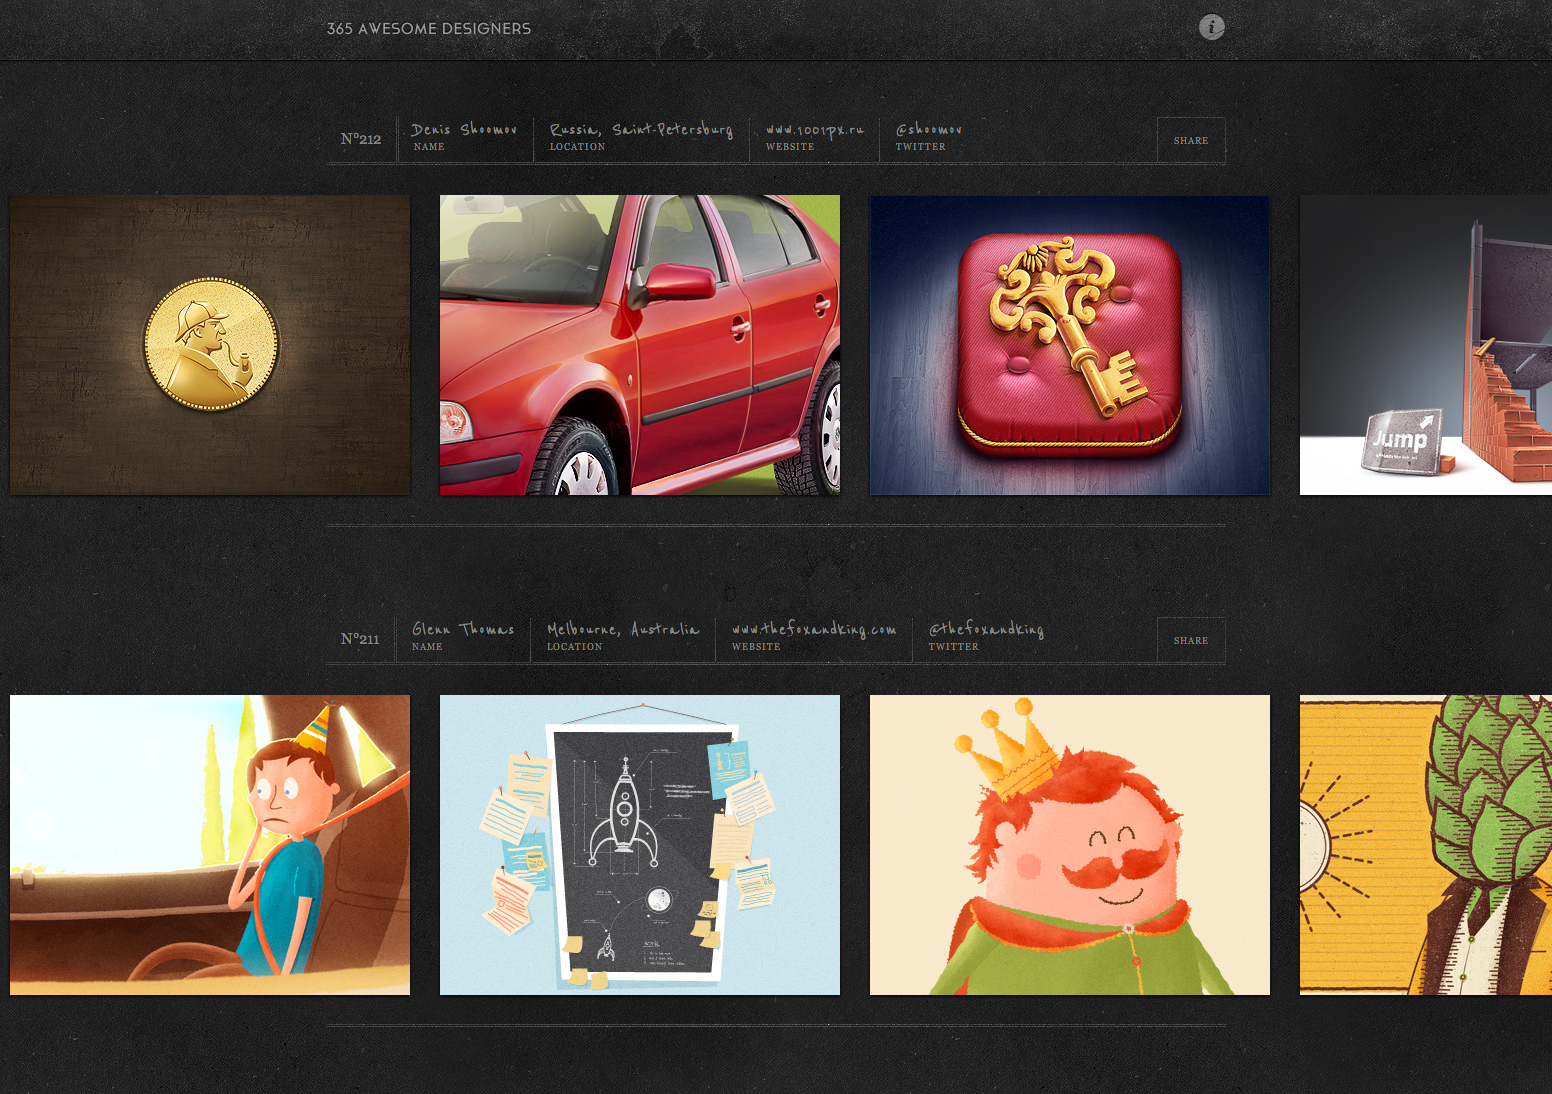 365 Awesome Designers